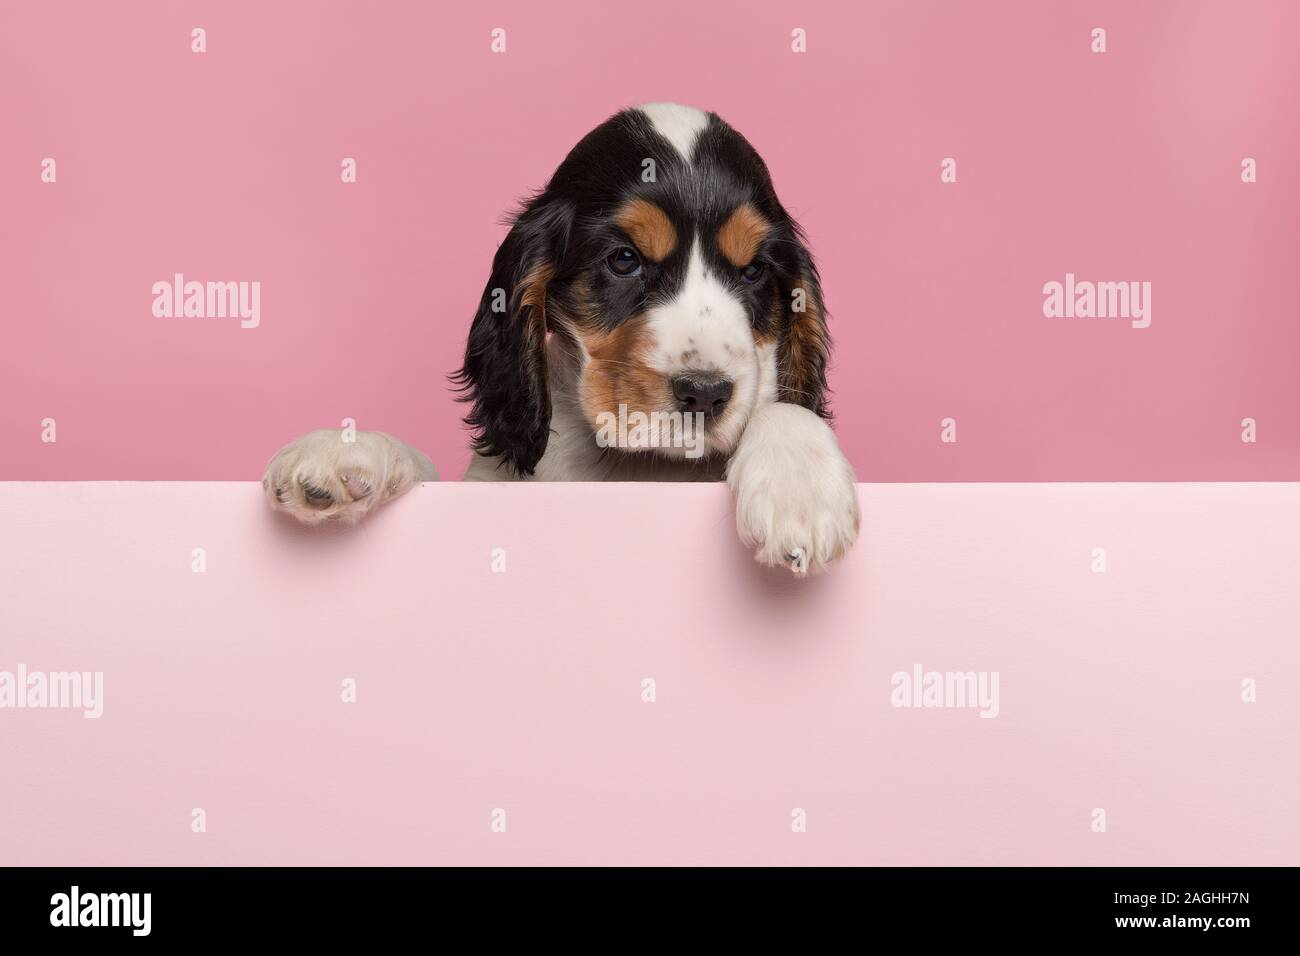 Cocker Spaniel puppy hanging over the border of a pastel pink board with its paws on a pink background Stock Photo